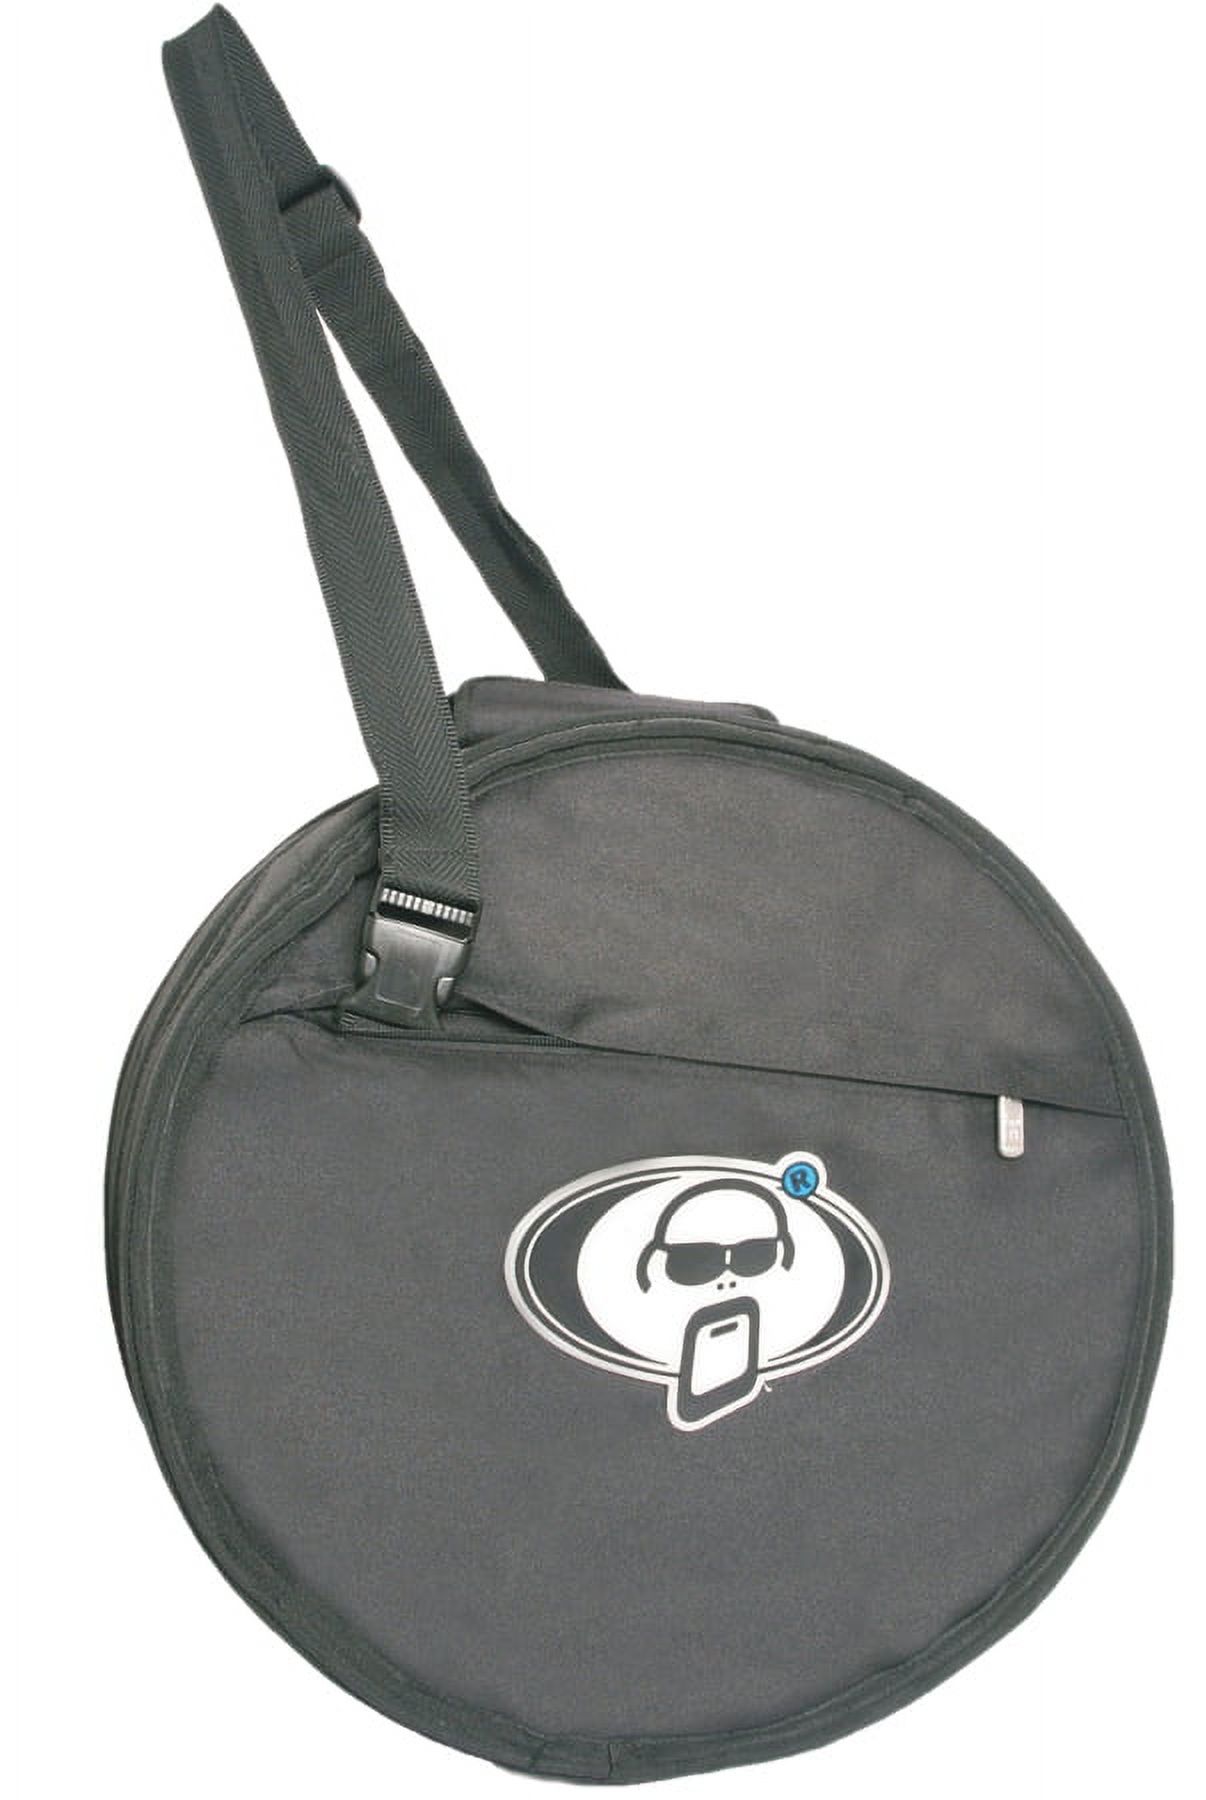 Protection Racket  14 x 5.5 in. Snare Drum Case with Strap - image 1 of 1